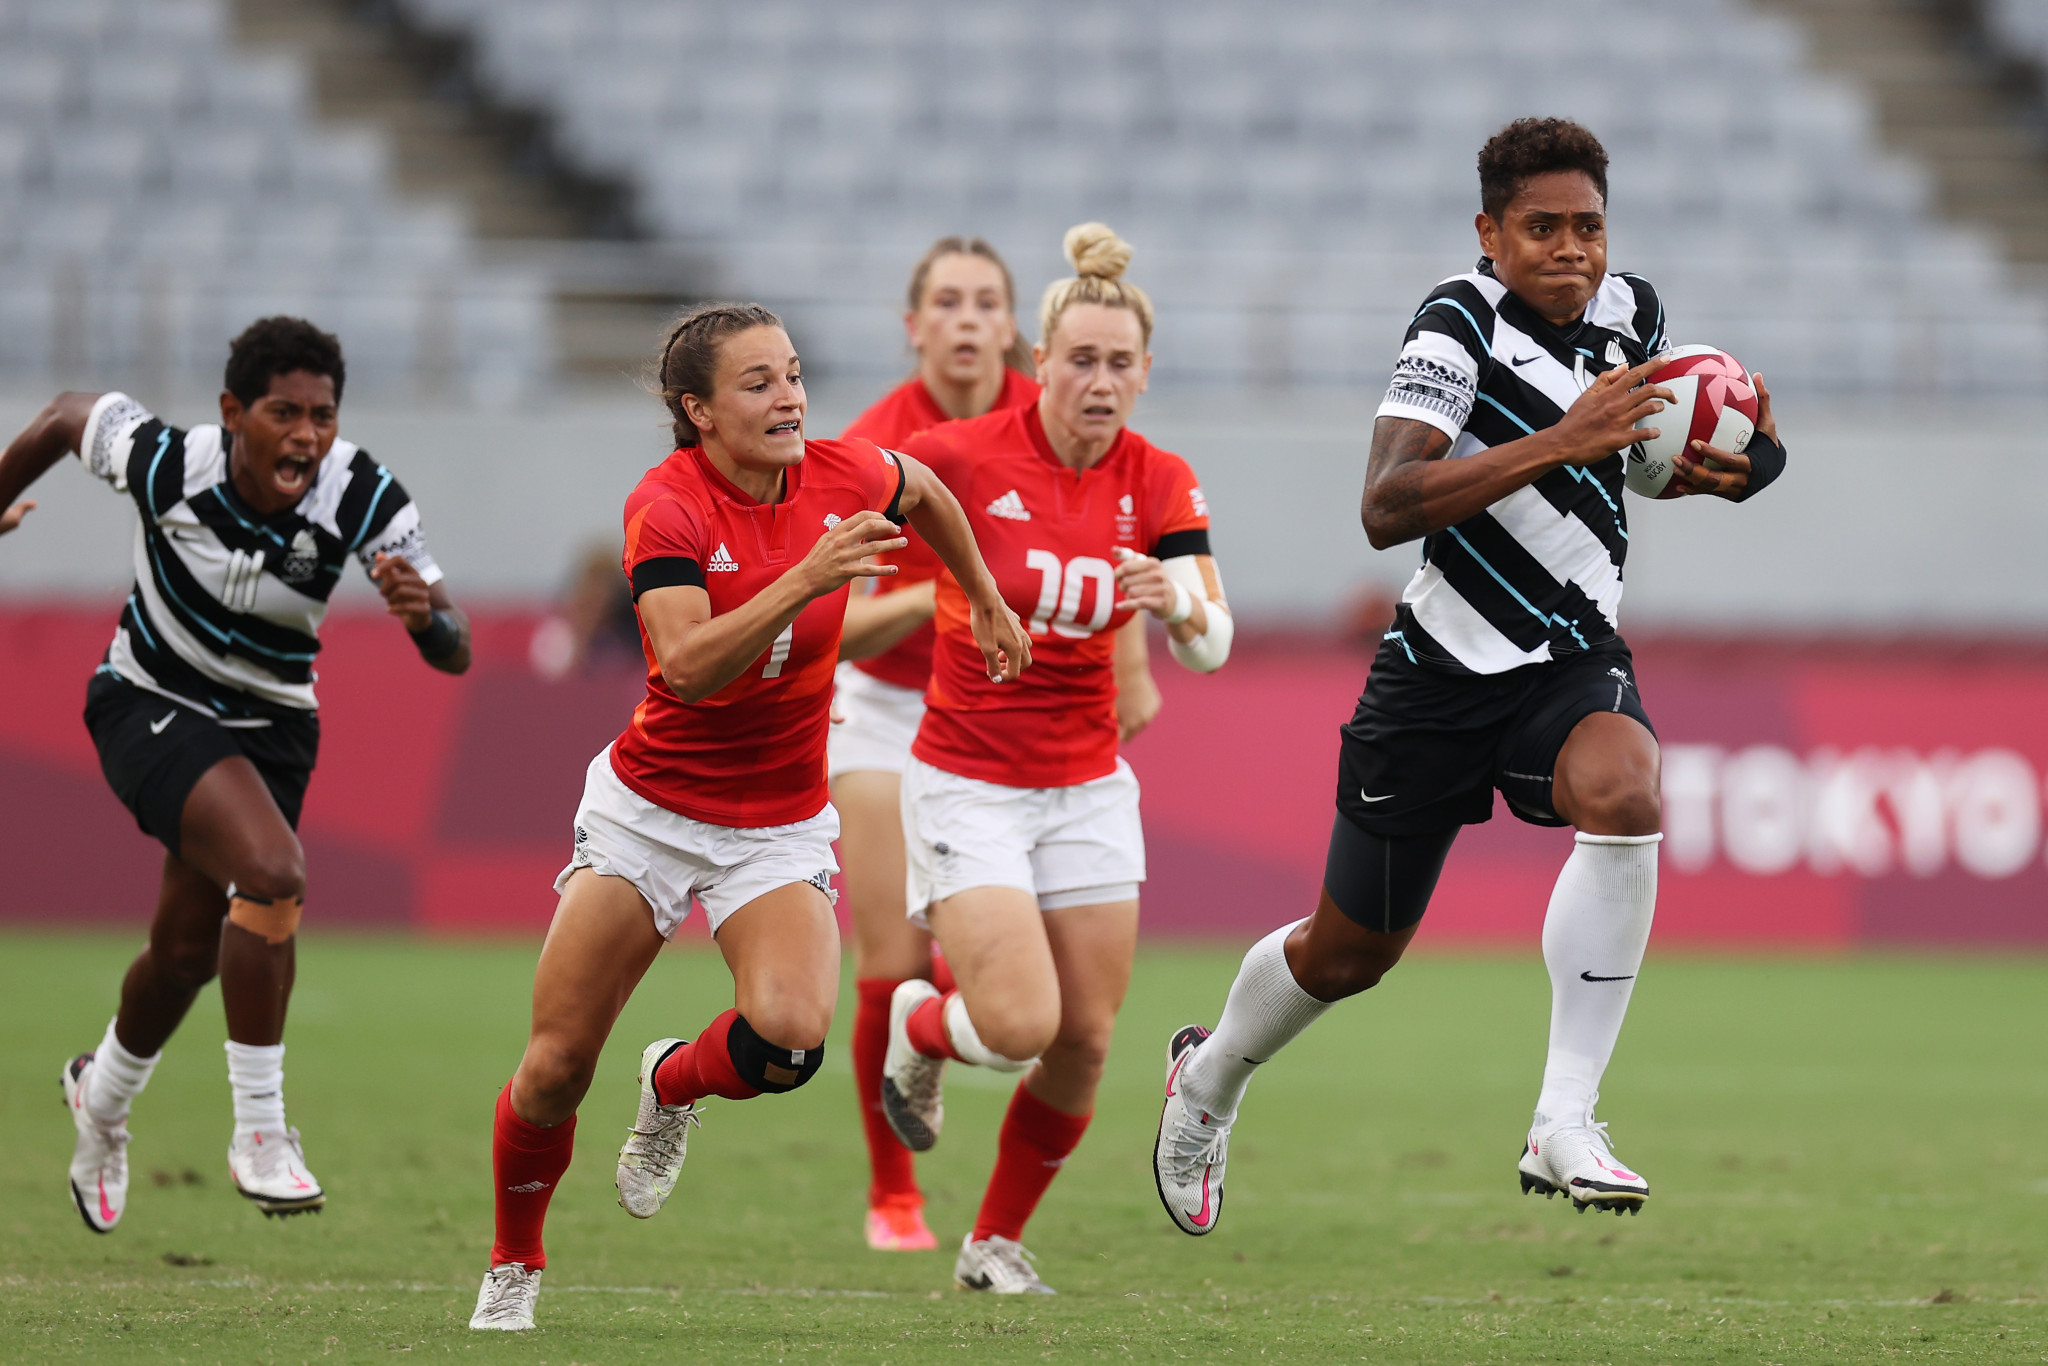 With events including the Rugby World Cup Sevens scheduled in September, FASANOC chief executive Lorraine Mar expects it to be a 